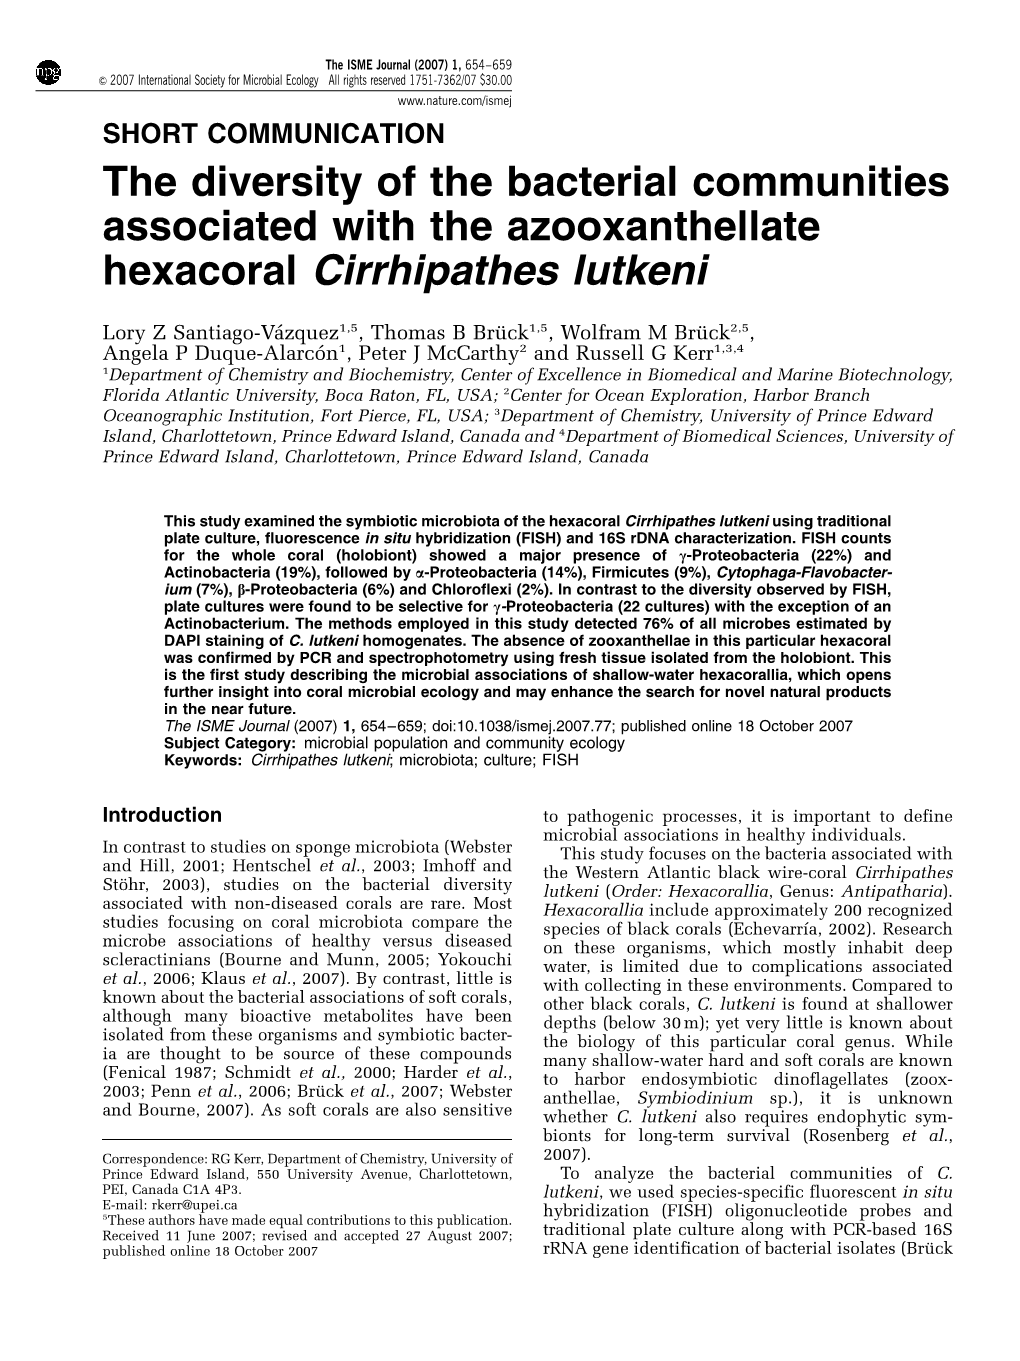 The Diversity of the Bacterial Communities Associated with the Azooxanthellate Hexacoral Cirrhipathes Lutkeni